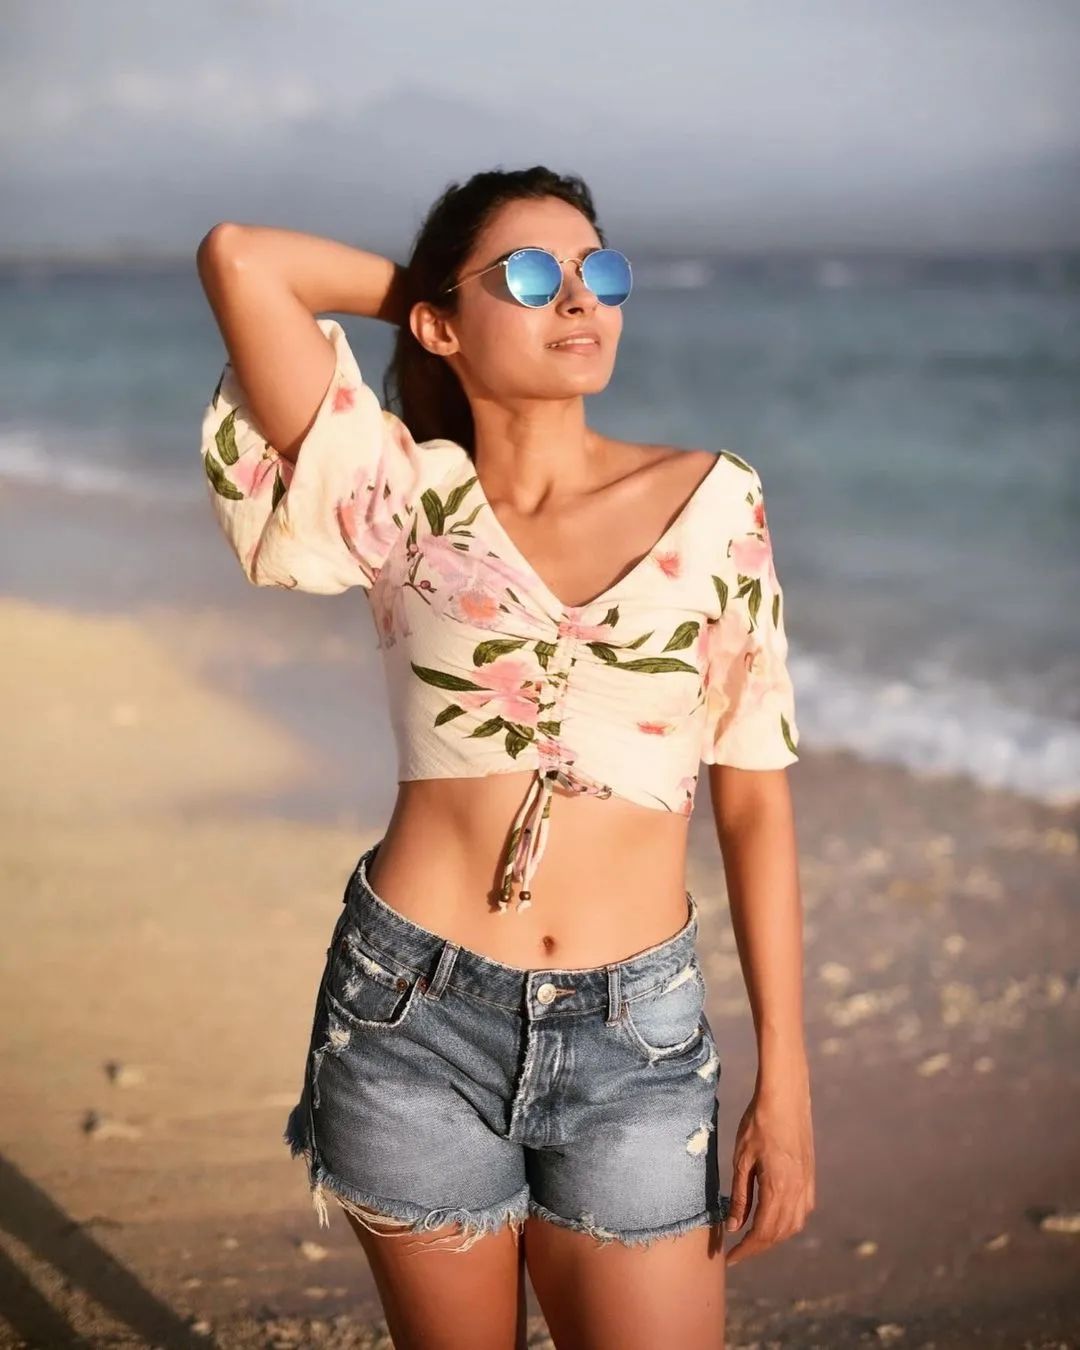 Scorching looks of Andrea Jeremiah